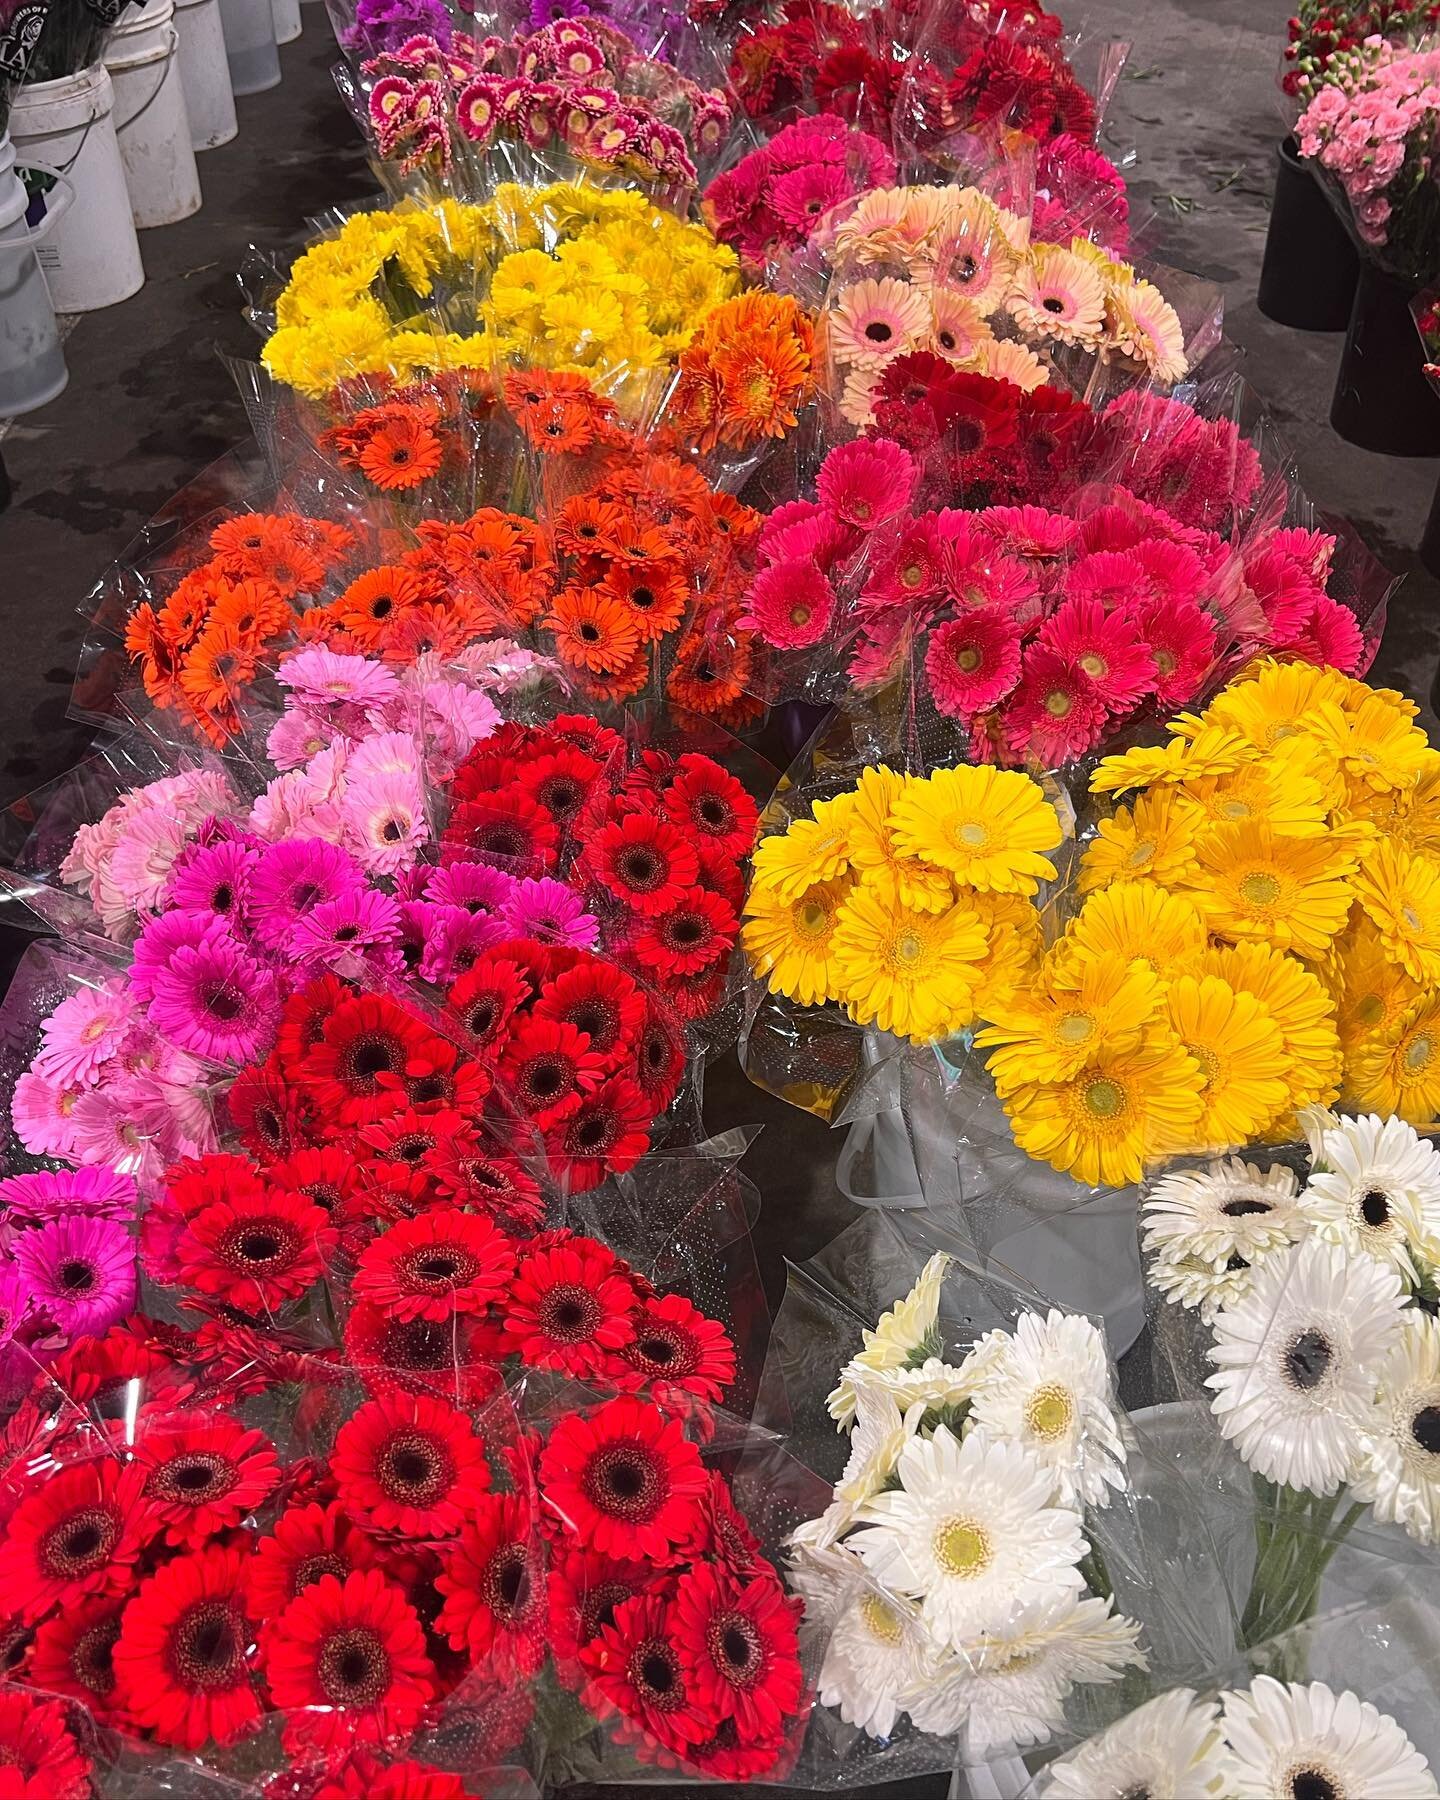 Gerberas for Mother&rsquo;s Day 💐💘

All of our amazing variety of Gerberas on display at Halit, we have a range from large &amp; mini Gerberas for all your perfect bunches 😍😍😍

To inquire for pickup or delivery: 
📧 sales@halitflowers.com

#hali